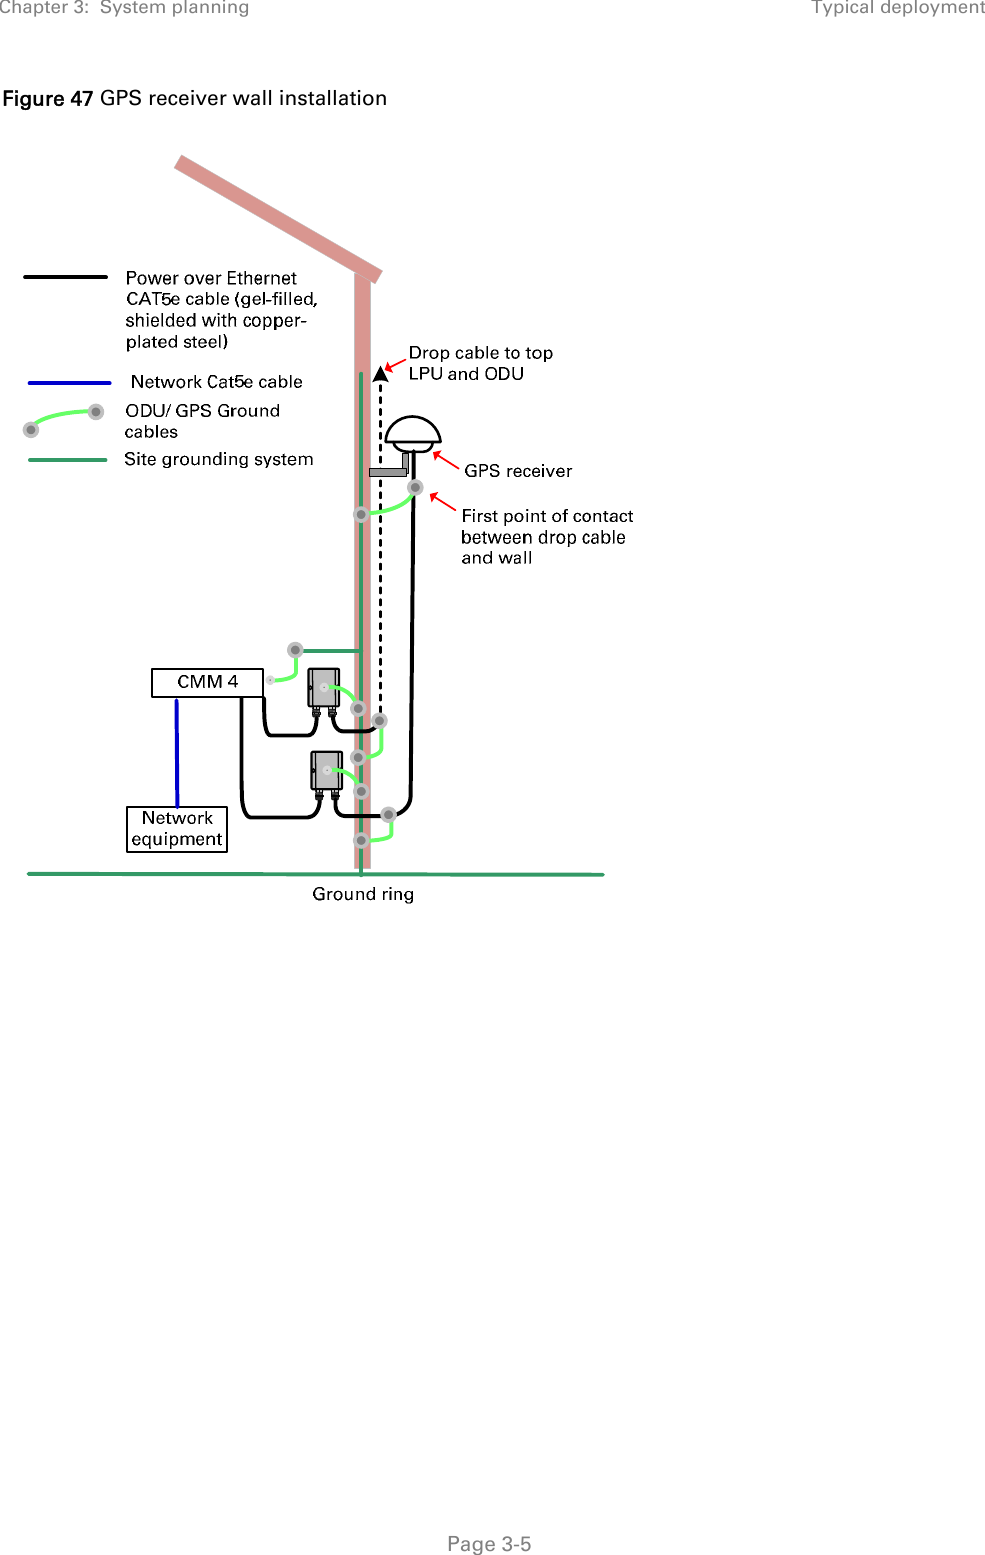 Chapter 3:  System planning  Typical deployment   Page 3-5 Figure 47 GPS receiver wall installation       